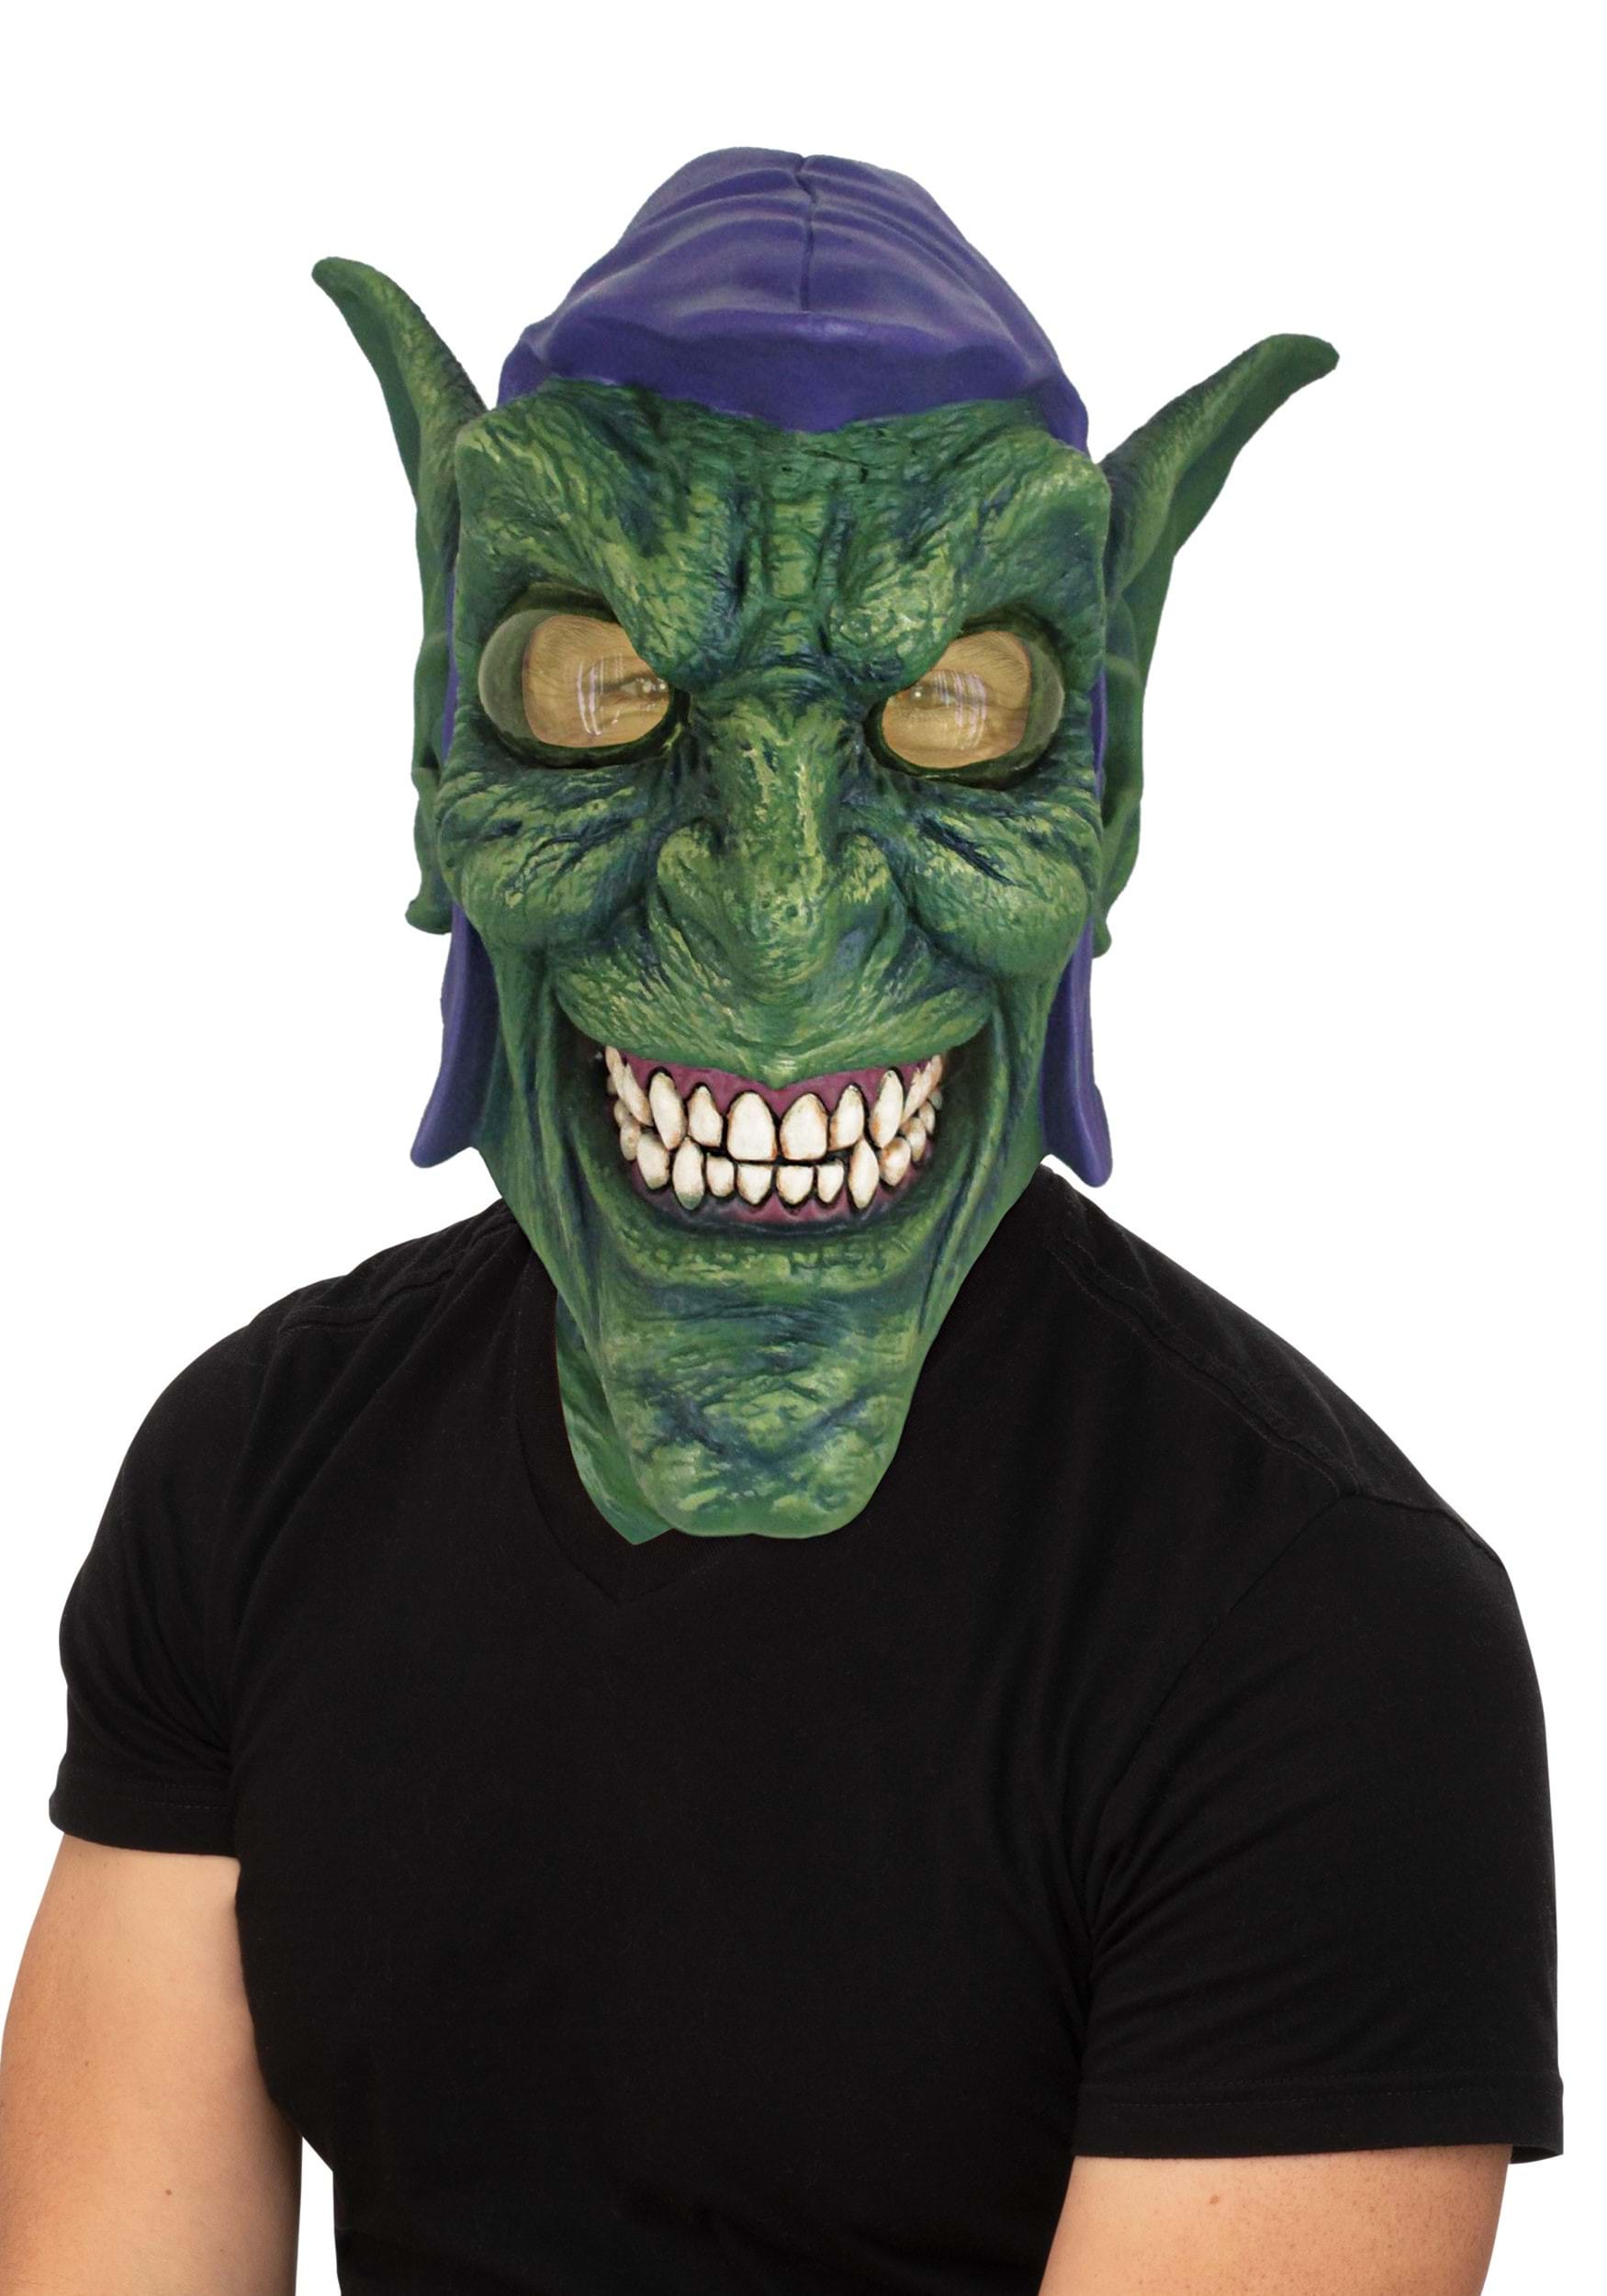 Green Goblin costume Mask Latex Full Face Spiderman Cosplay Party Accessories Ne 